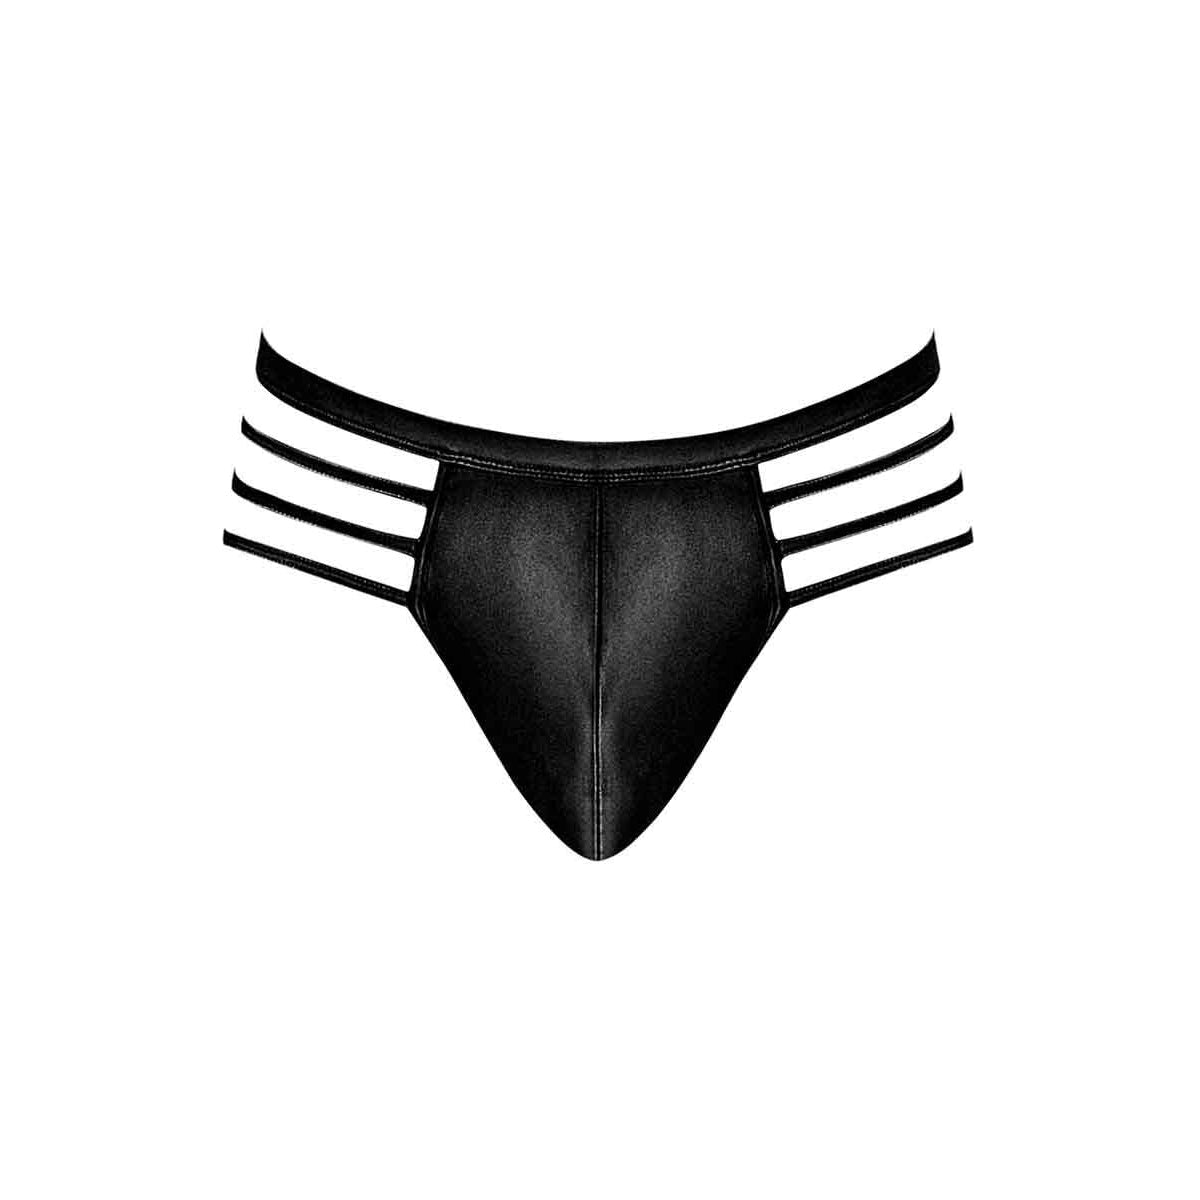 Cage Matte Cage Thong